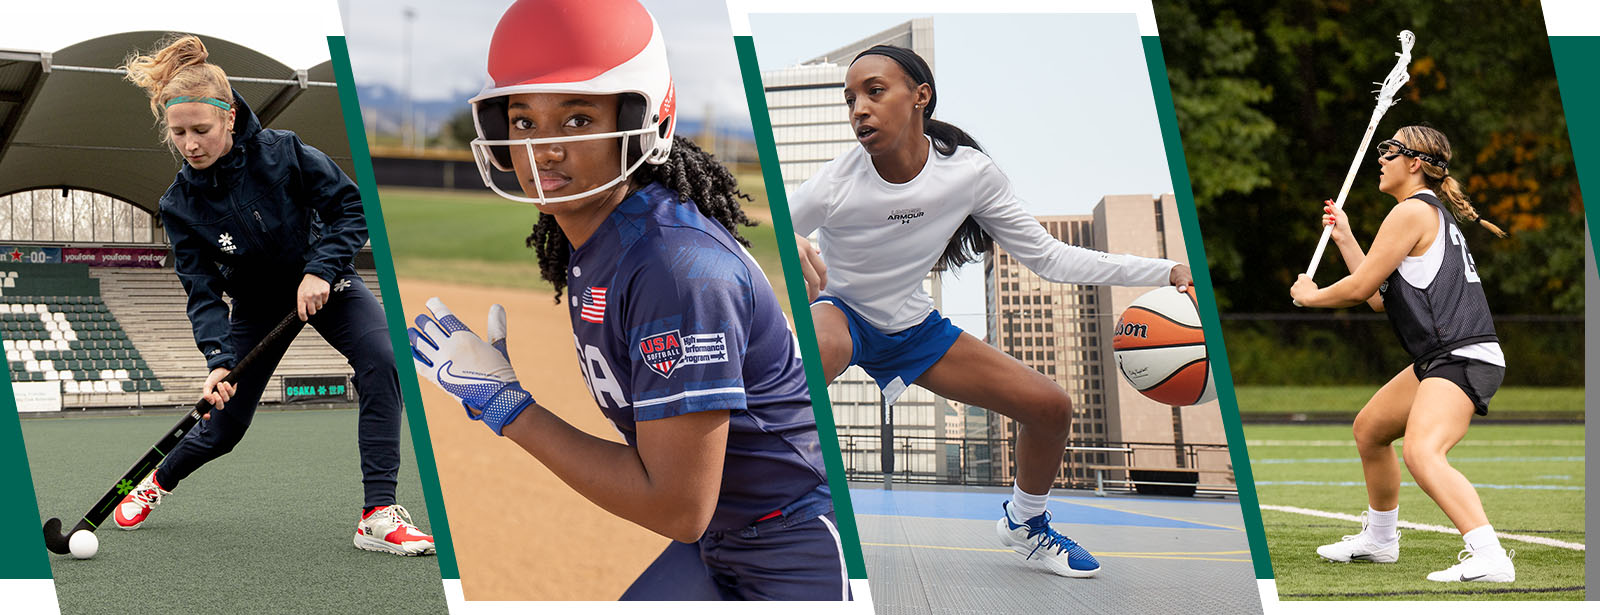 Dick's Sporting Goods Unveils Women's Activewear Line for All-Day Use -  Athletech News